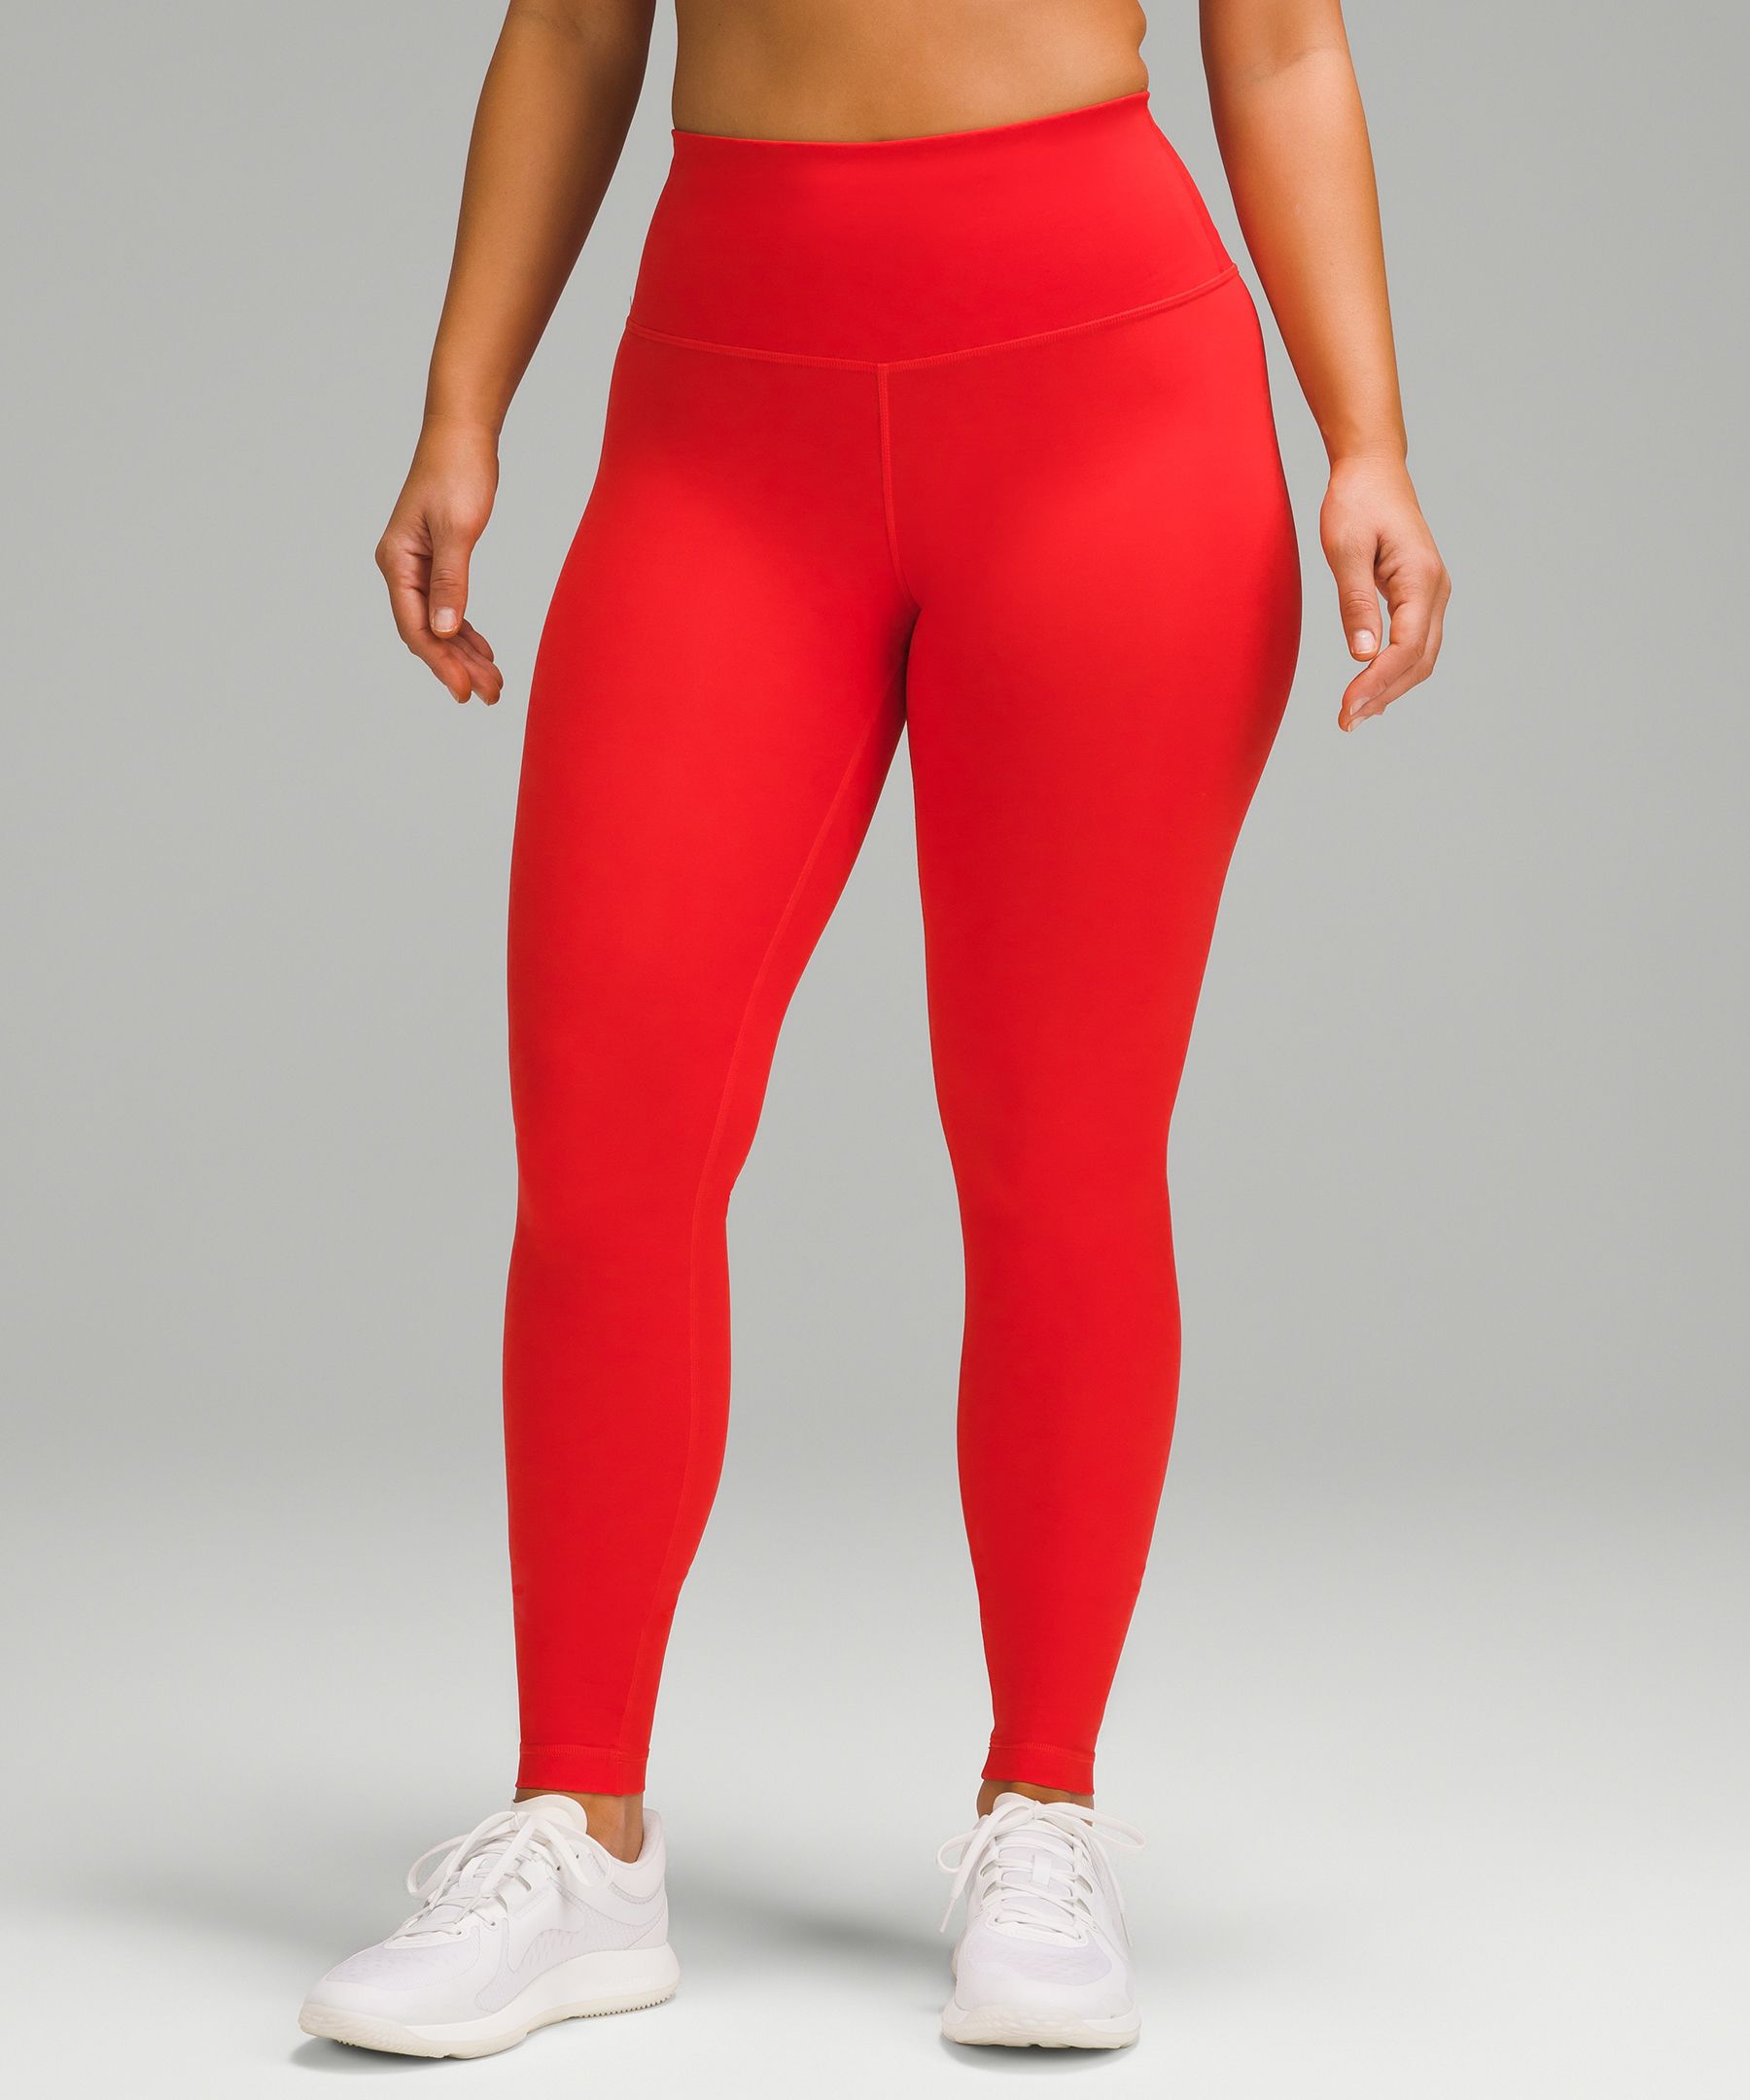 Wunder Train Contour Fit High-Rise Tight 28" | Women's Leggings/Tights